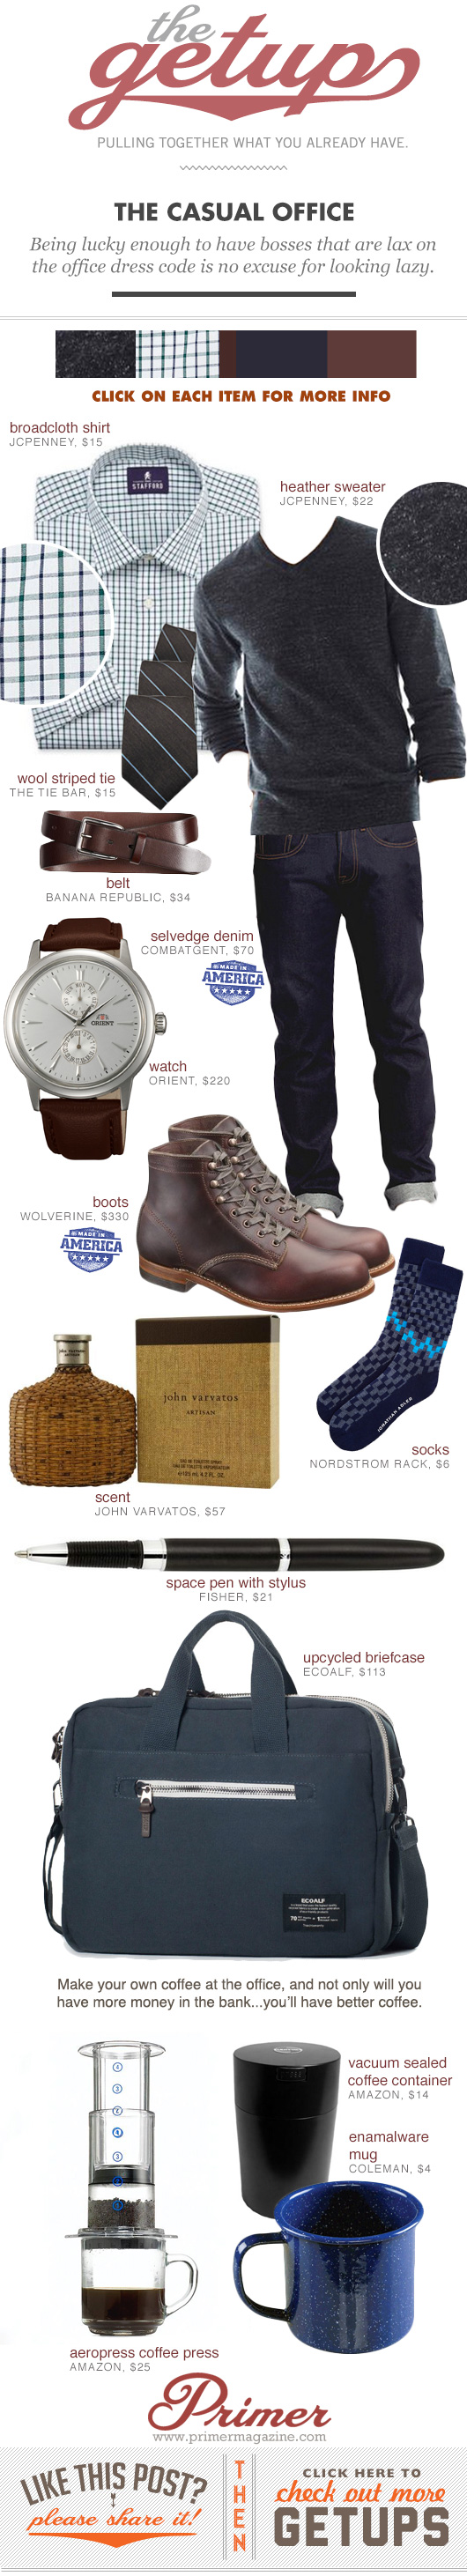 The Getup - Casual Office, gray sweater, button up shirt, blue jeans, and Wolverine boots